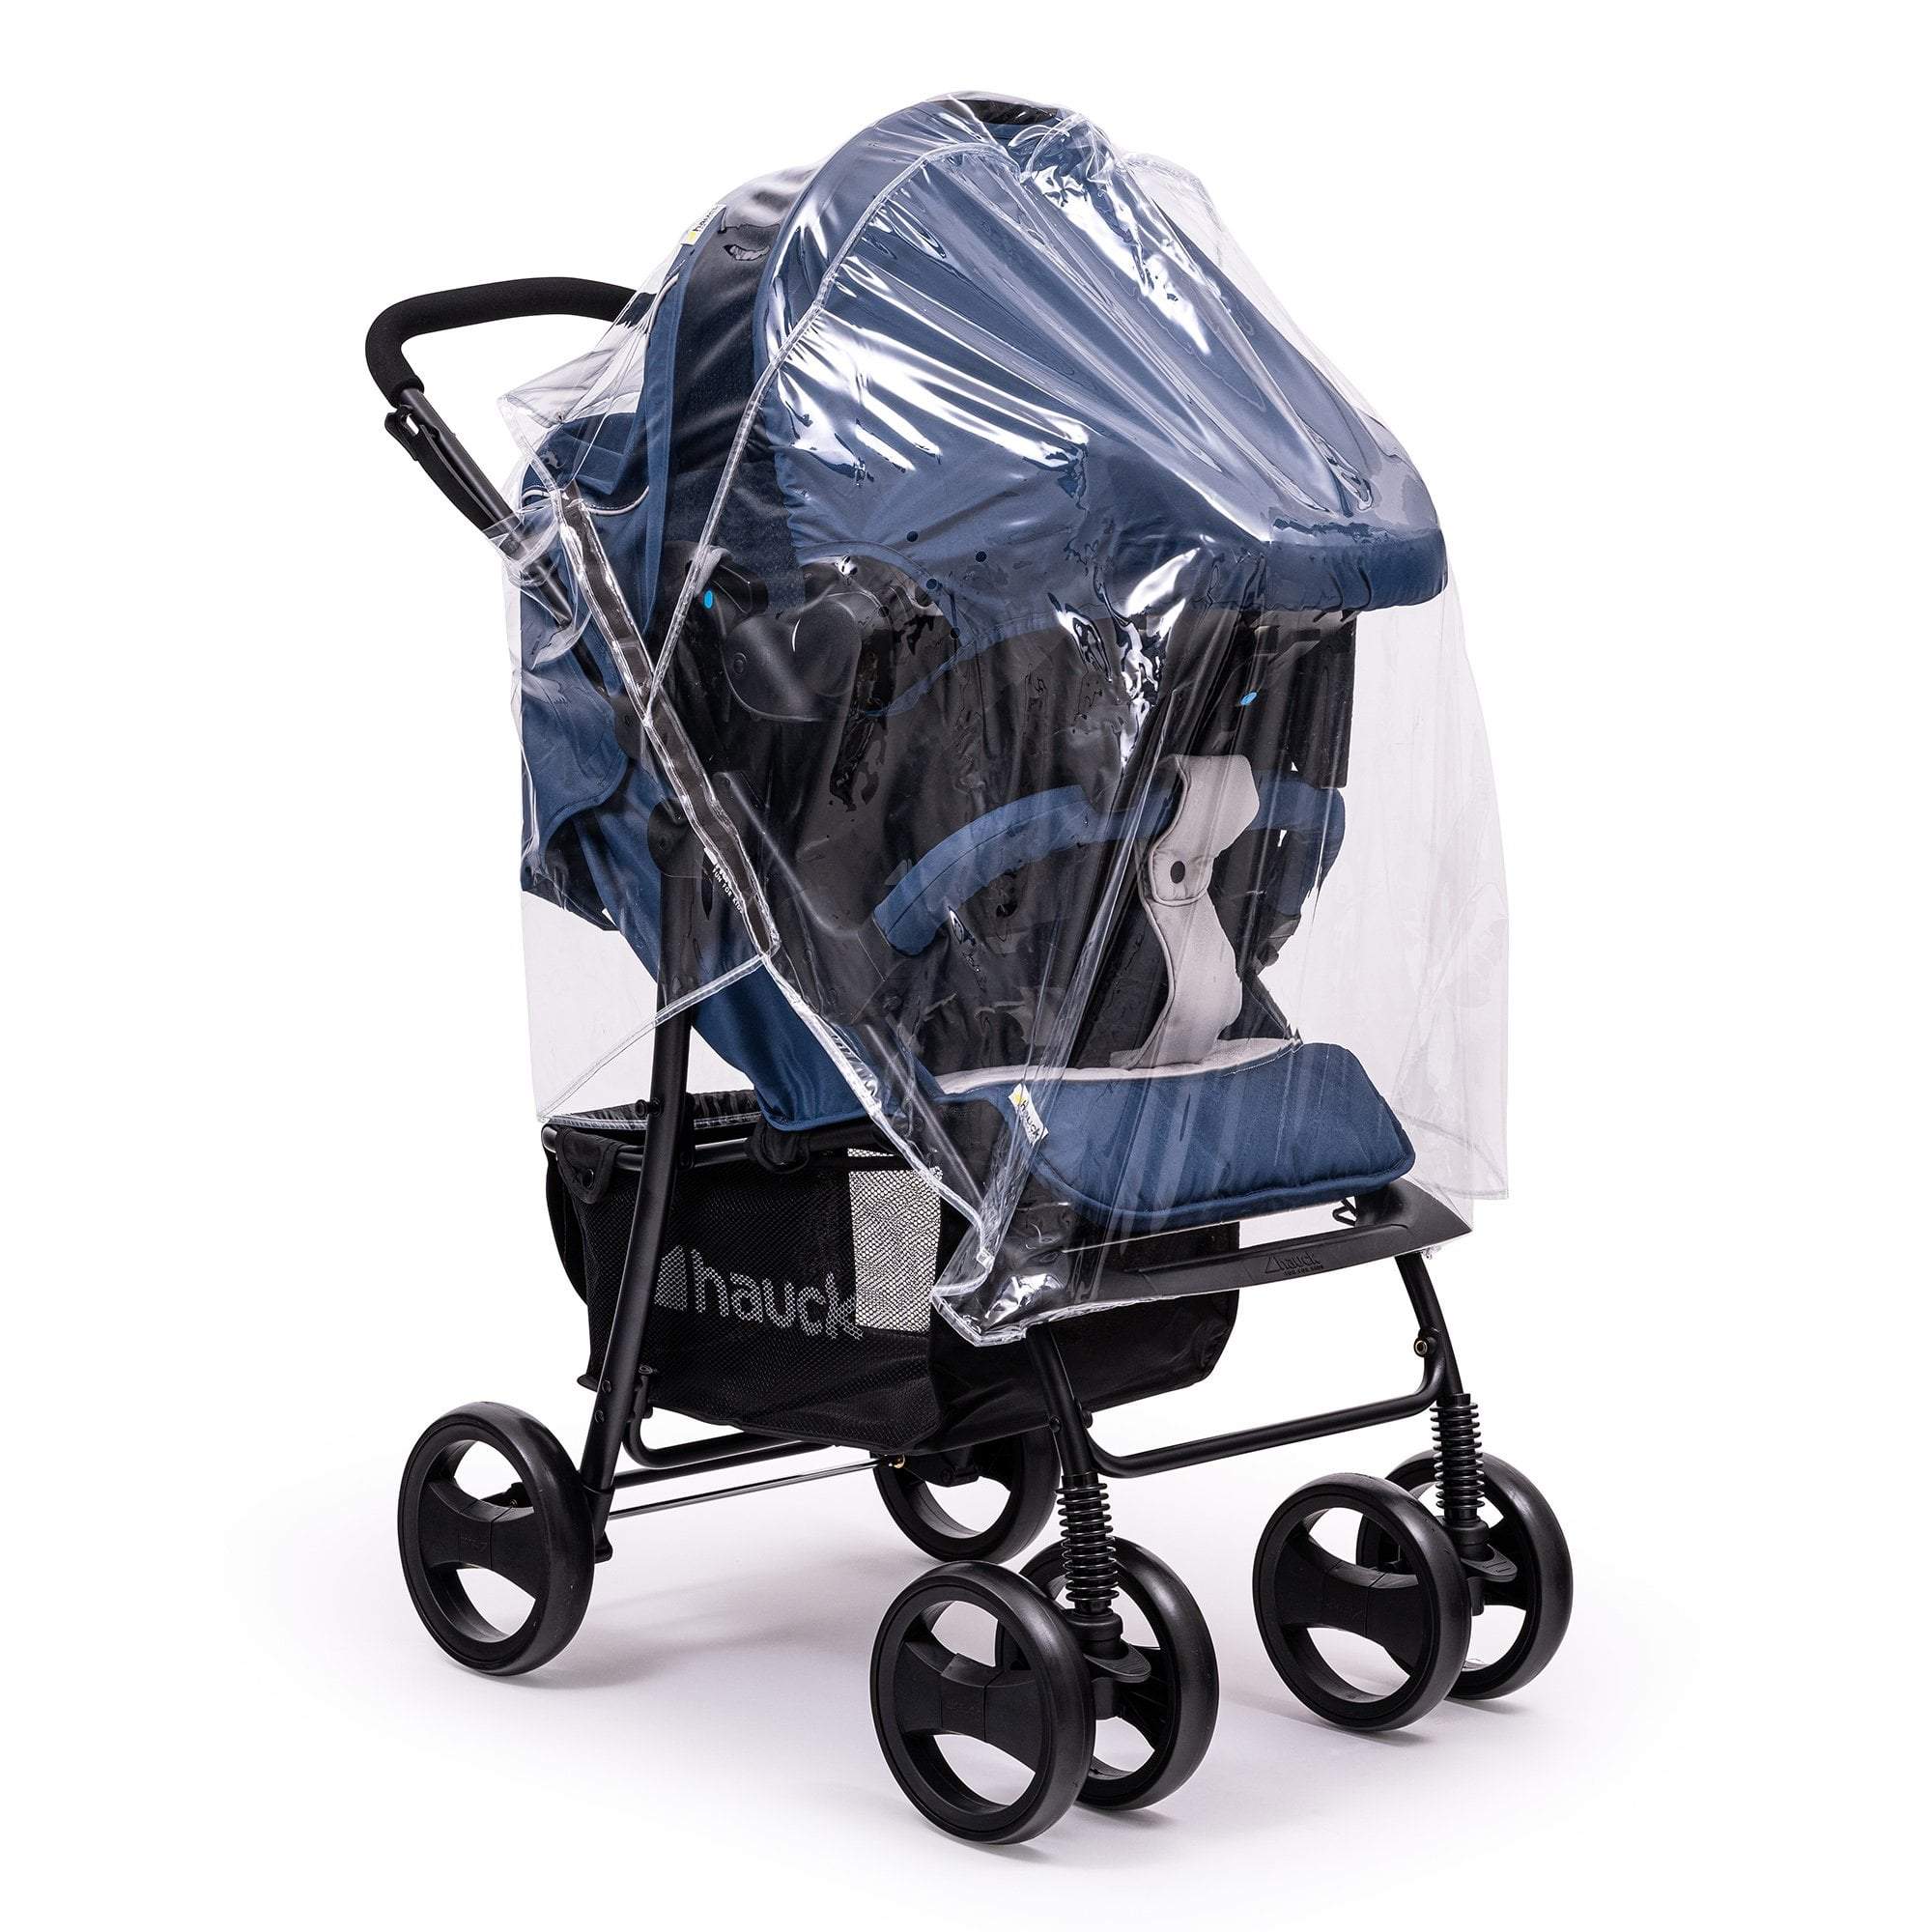 Travel System Raincover Compatible with Bumbleride - Fits All Models - For Your Little One